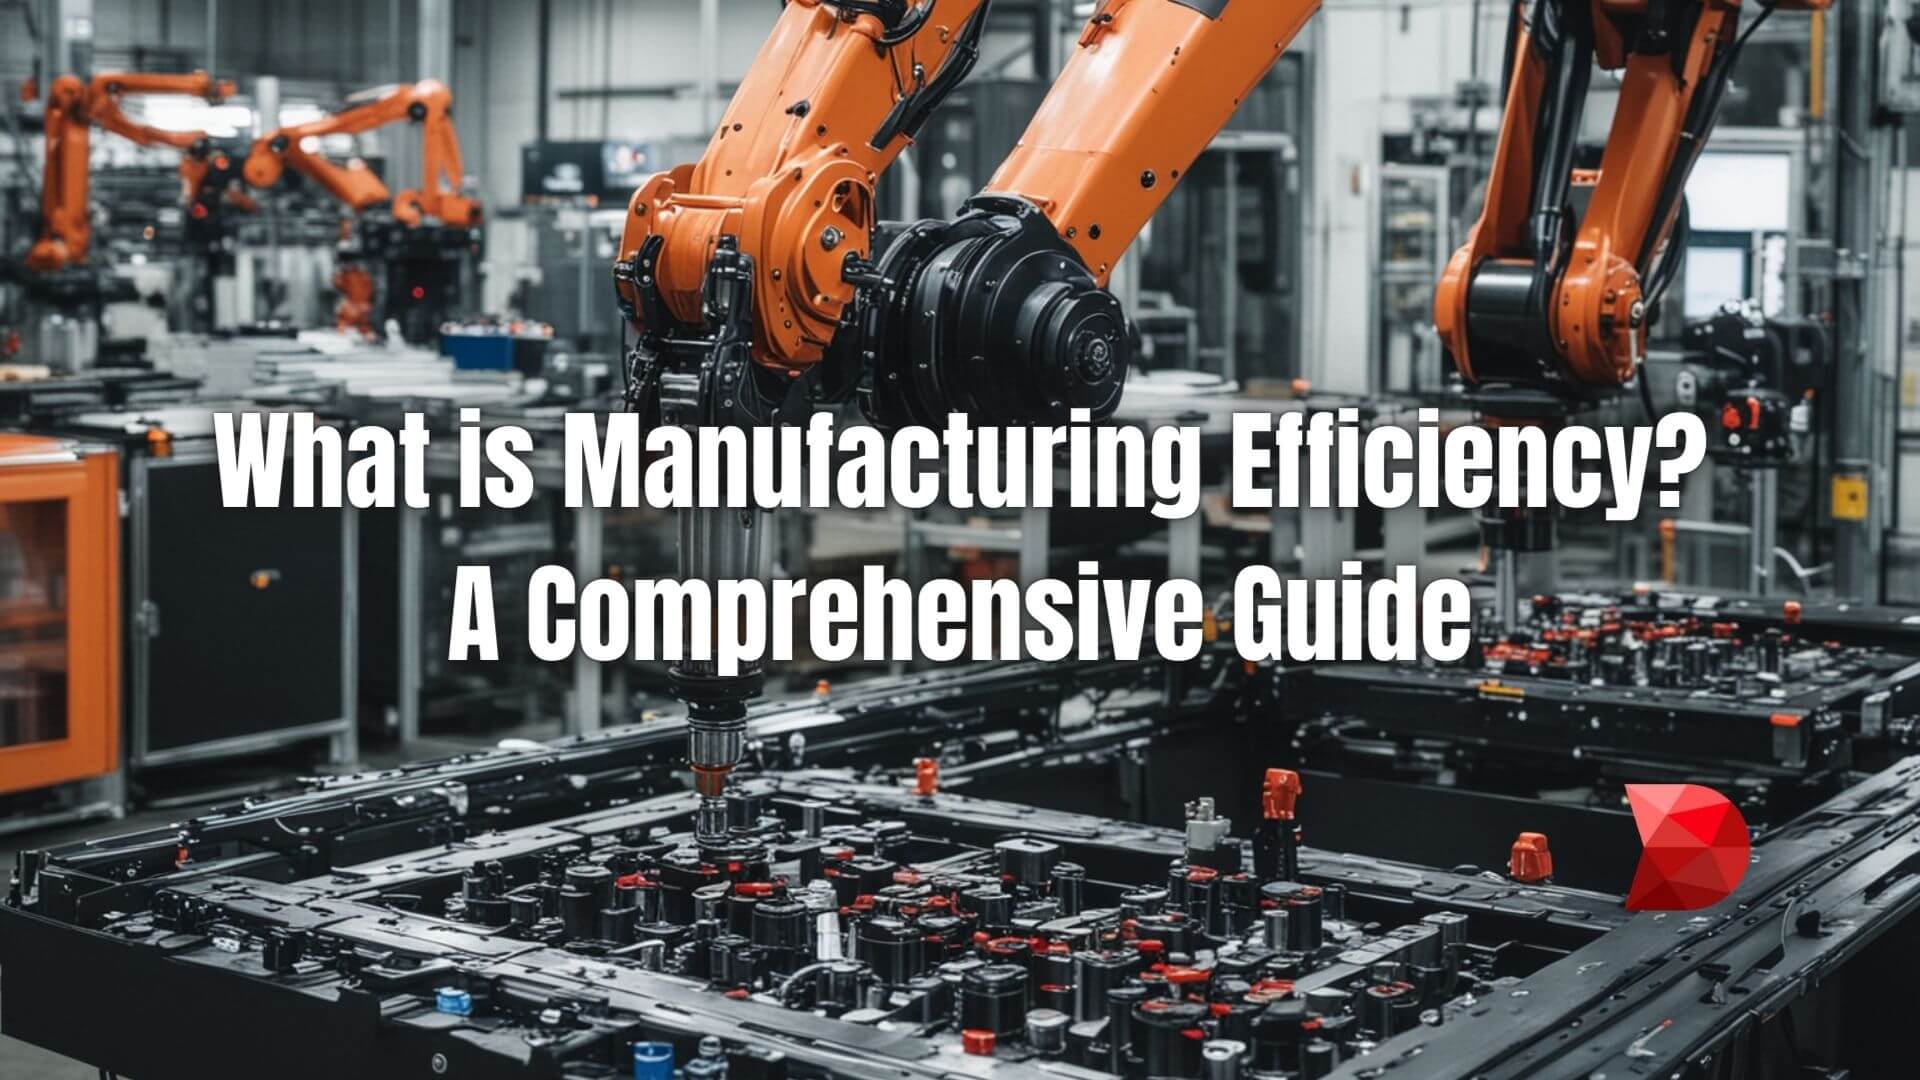 Discover the roadmap to manufacturing efficiency! Learn strategies to streamline operations and enhance output like never before.